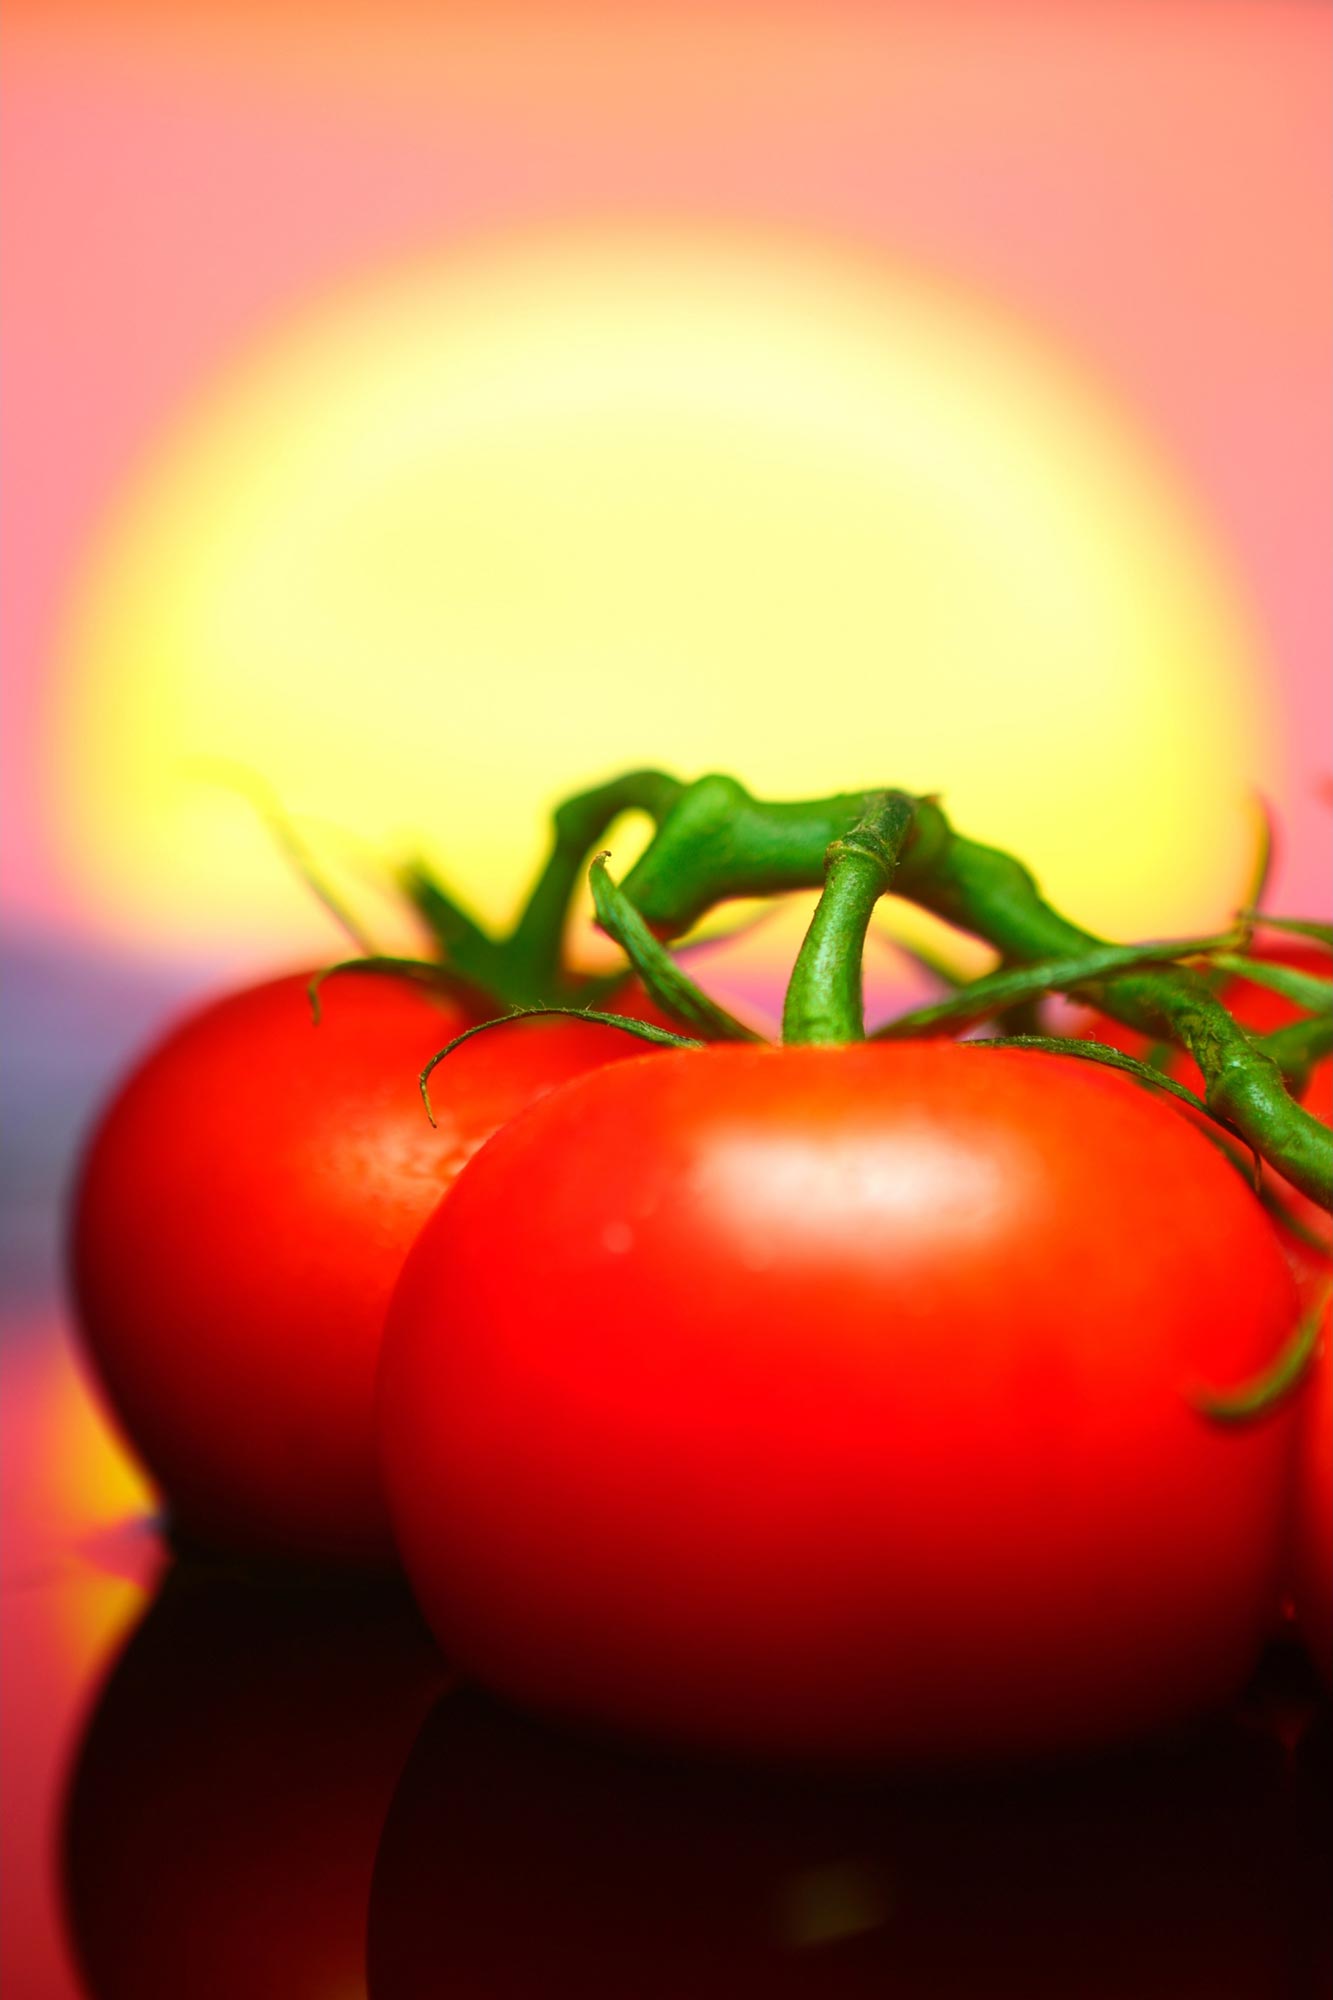 Scientists Create Tomatoes Genetically Engineered To Boost Vitamin D - SciTechDaily